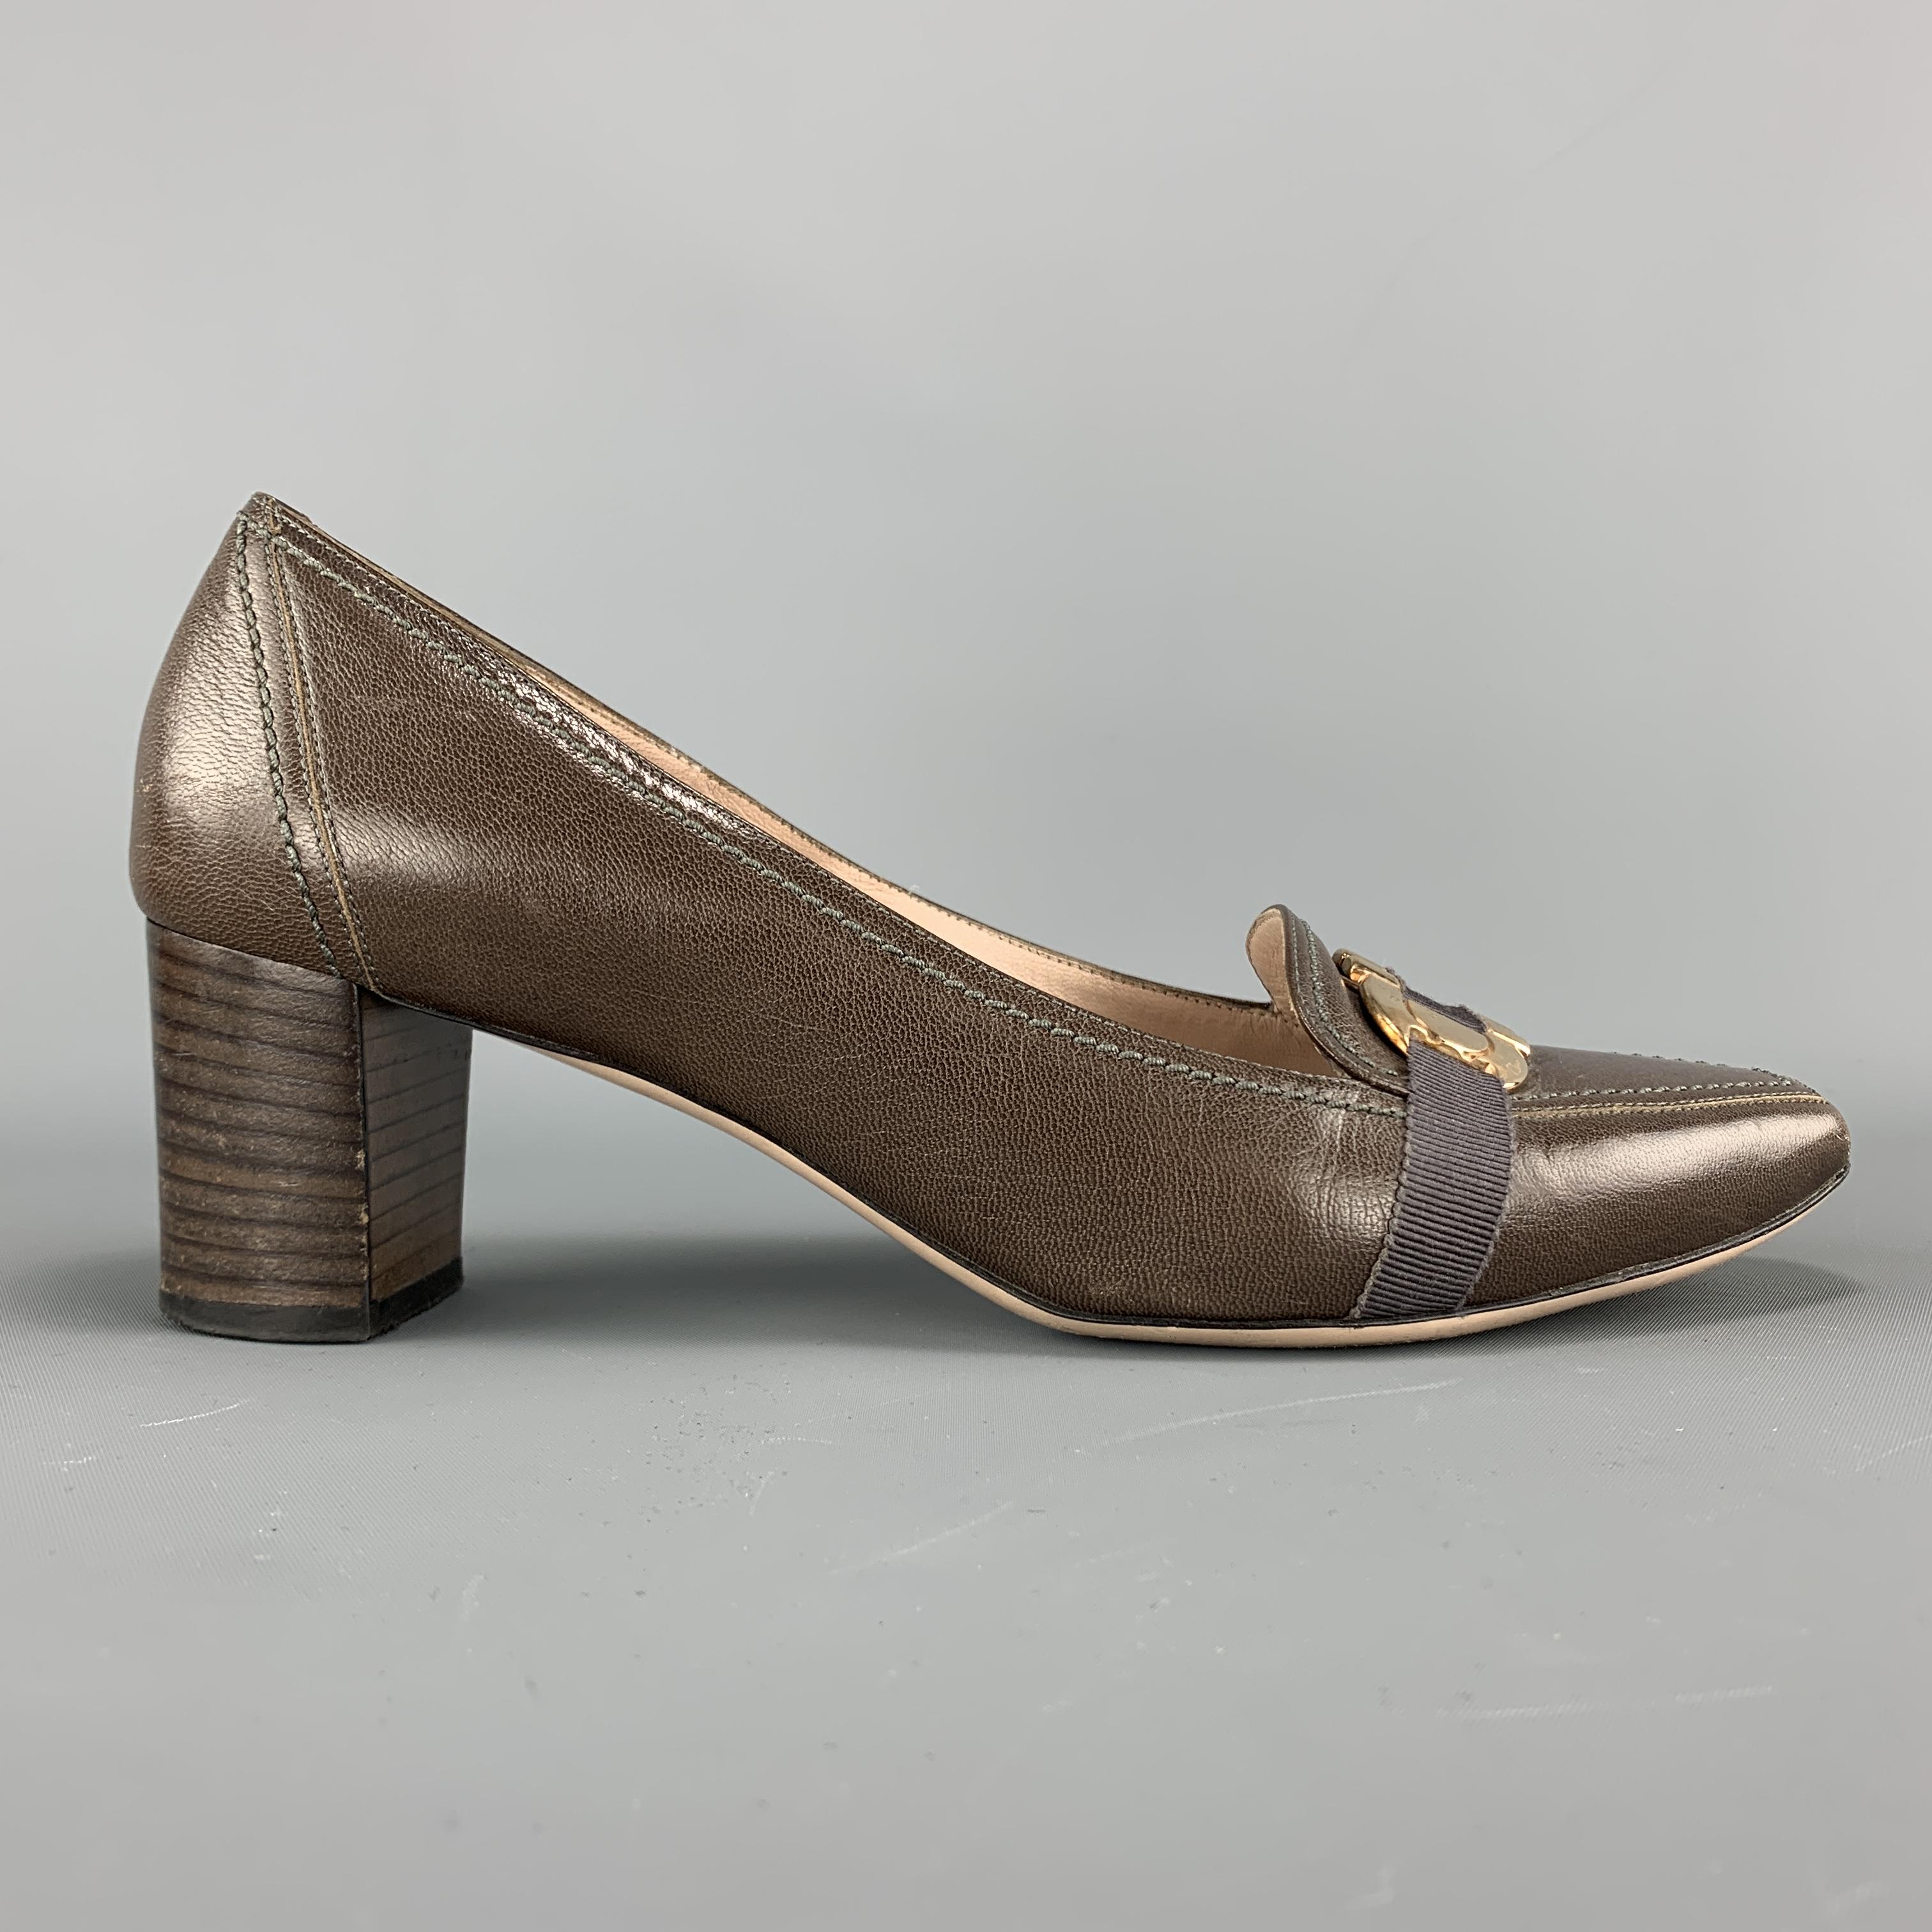 Vintage SALVATORE FERRAGAMO loafer pumps come in taupe leather with a ribbon accent gold tone Gancini front, and chunky stacked heel. Made in Italy.

Very Good Pre-Owned Condition.
Marked: 8 1/2

Heel: 2.45 in.